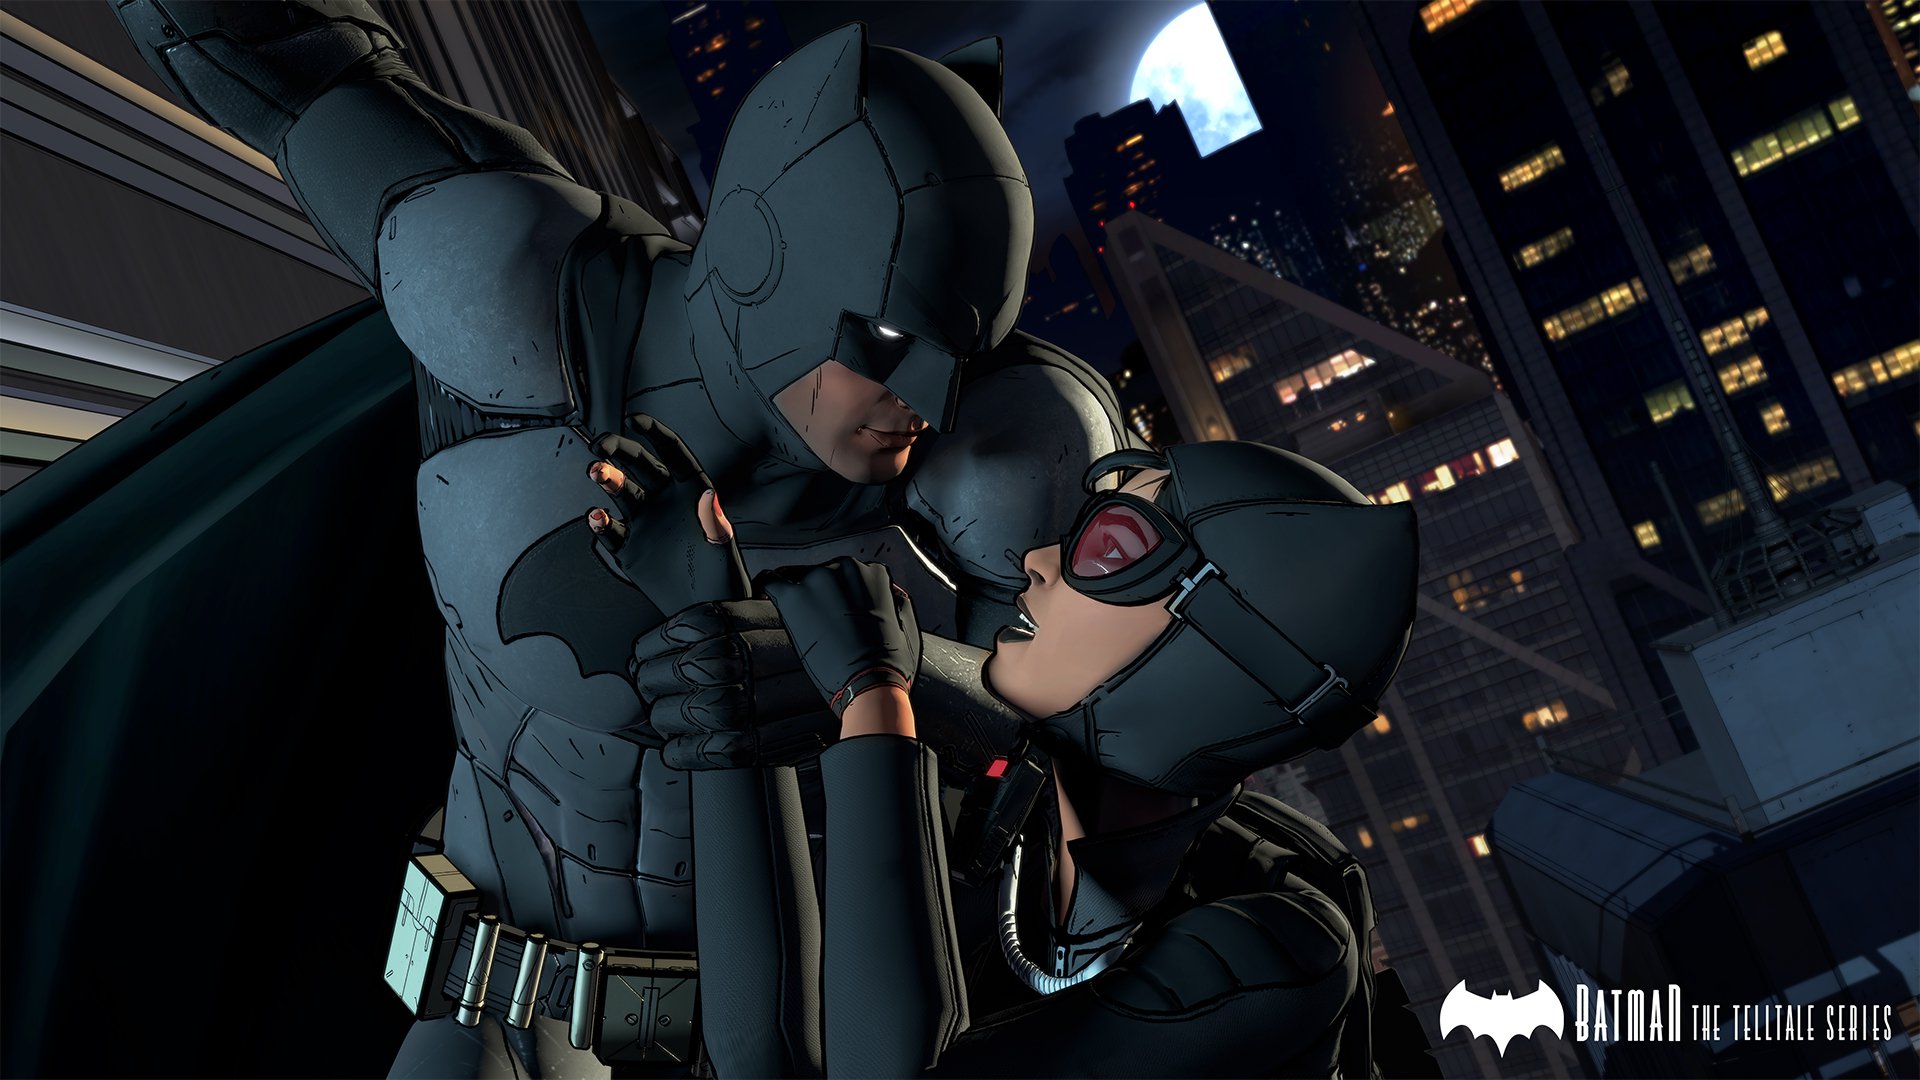 More of TellTale’s “Batman” Series Shown at E3 2016 - Catwoman Confirmed